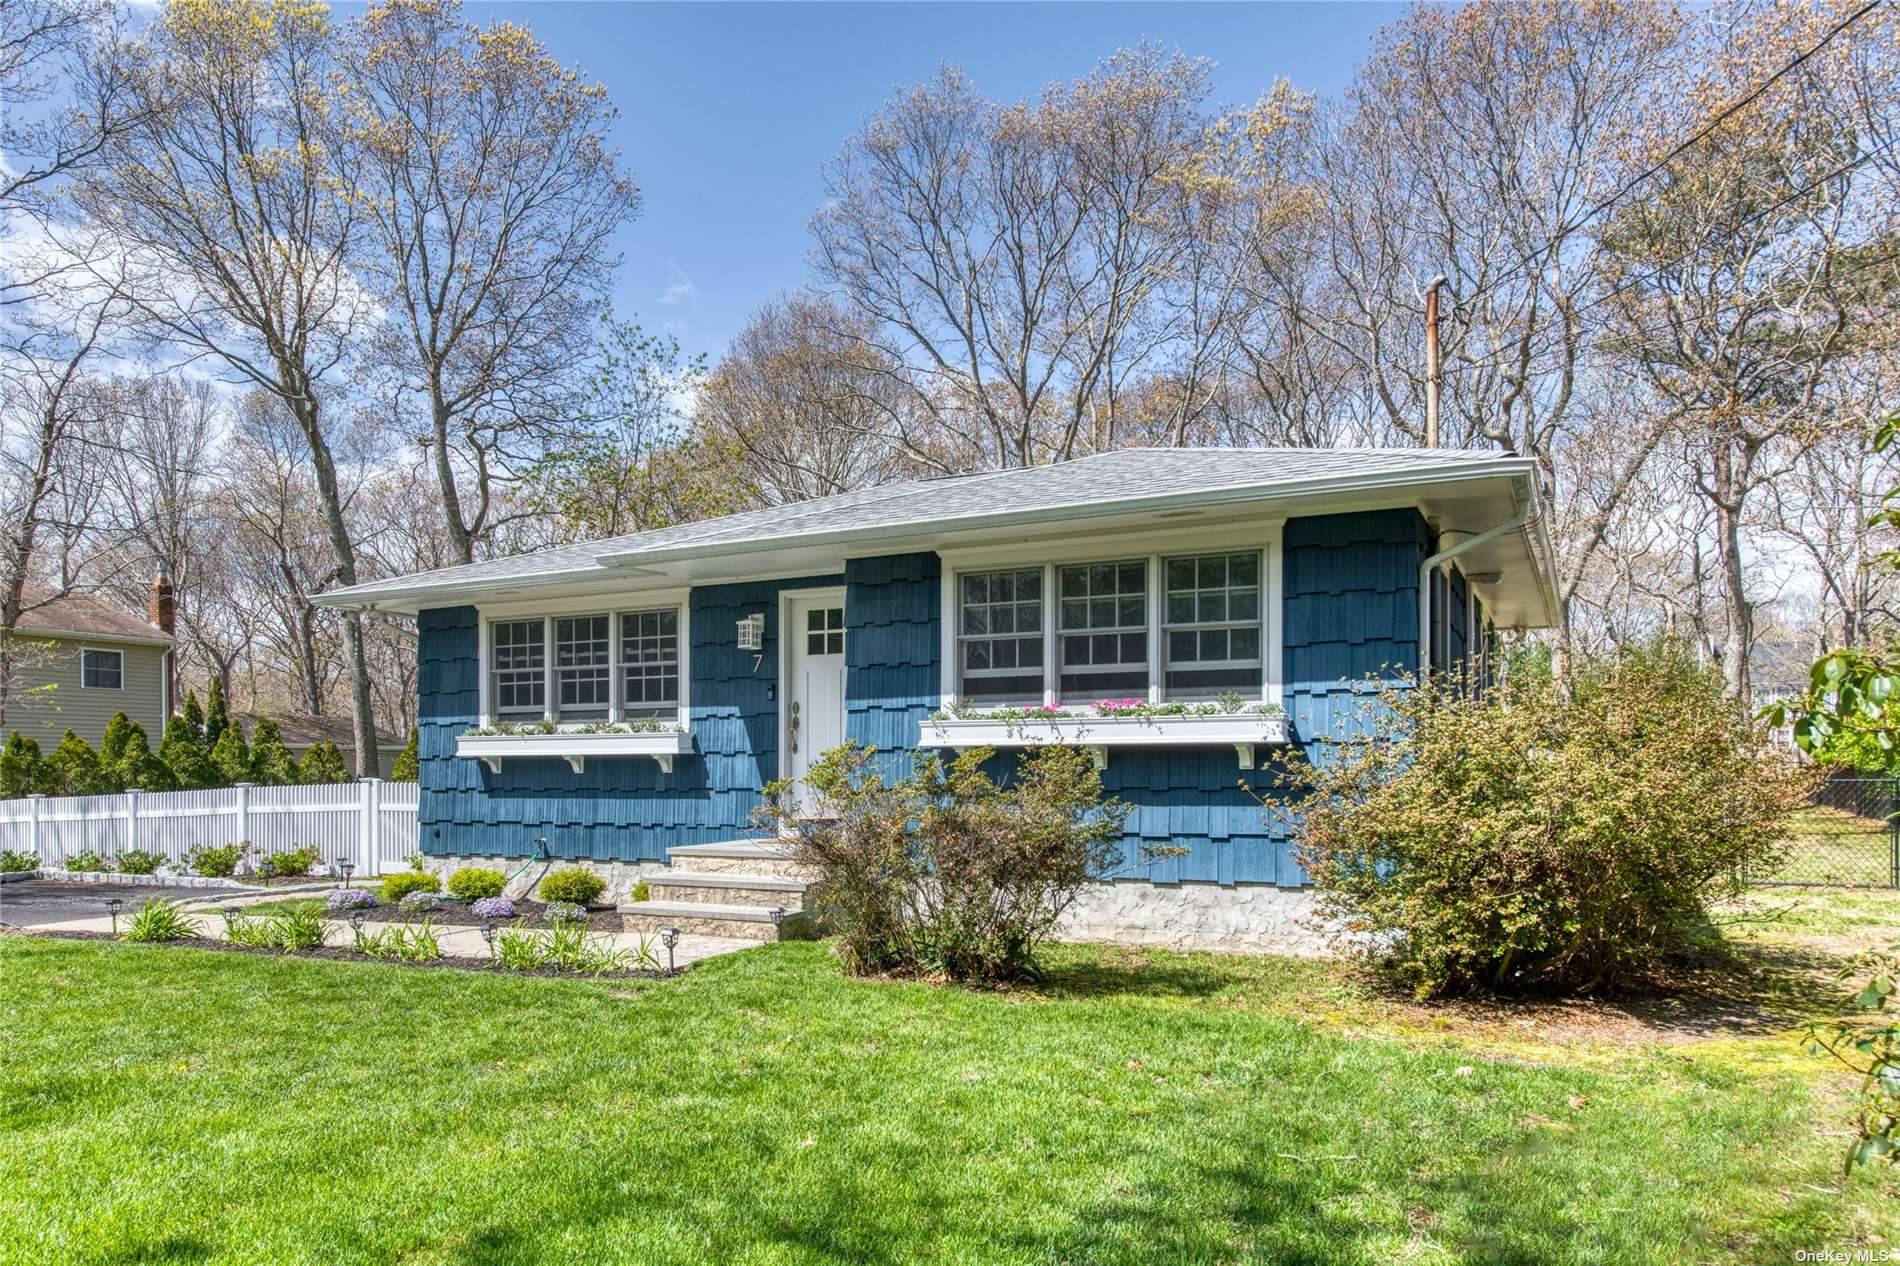 Situated in the quiet Howell Place neighborhood of Speonk, this 2 bedroom home with hardwood floors throughout is truly move in ready.